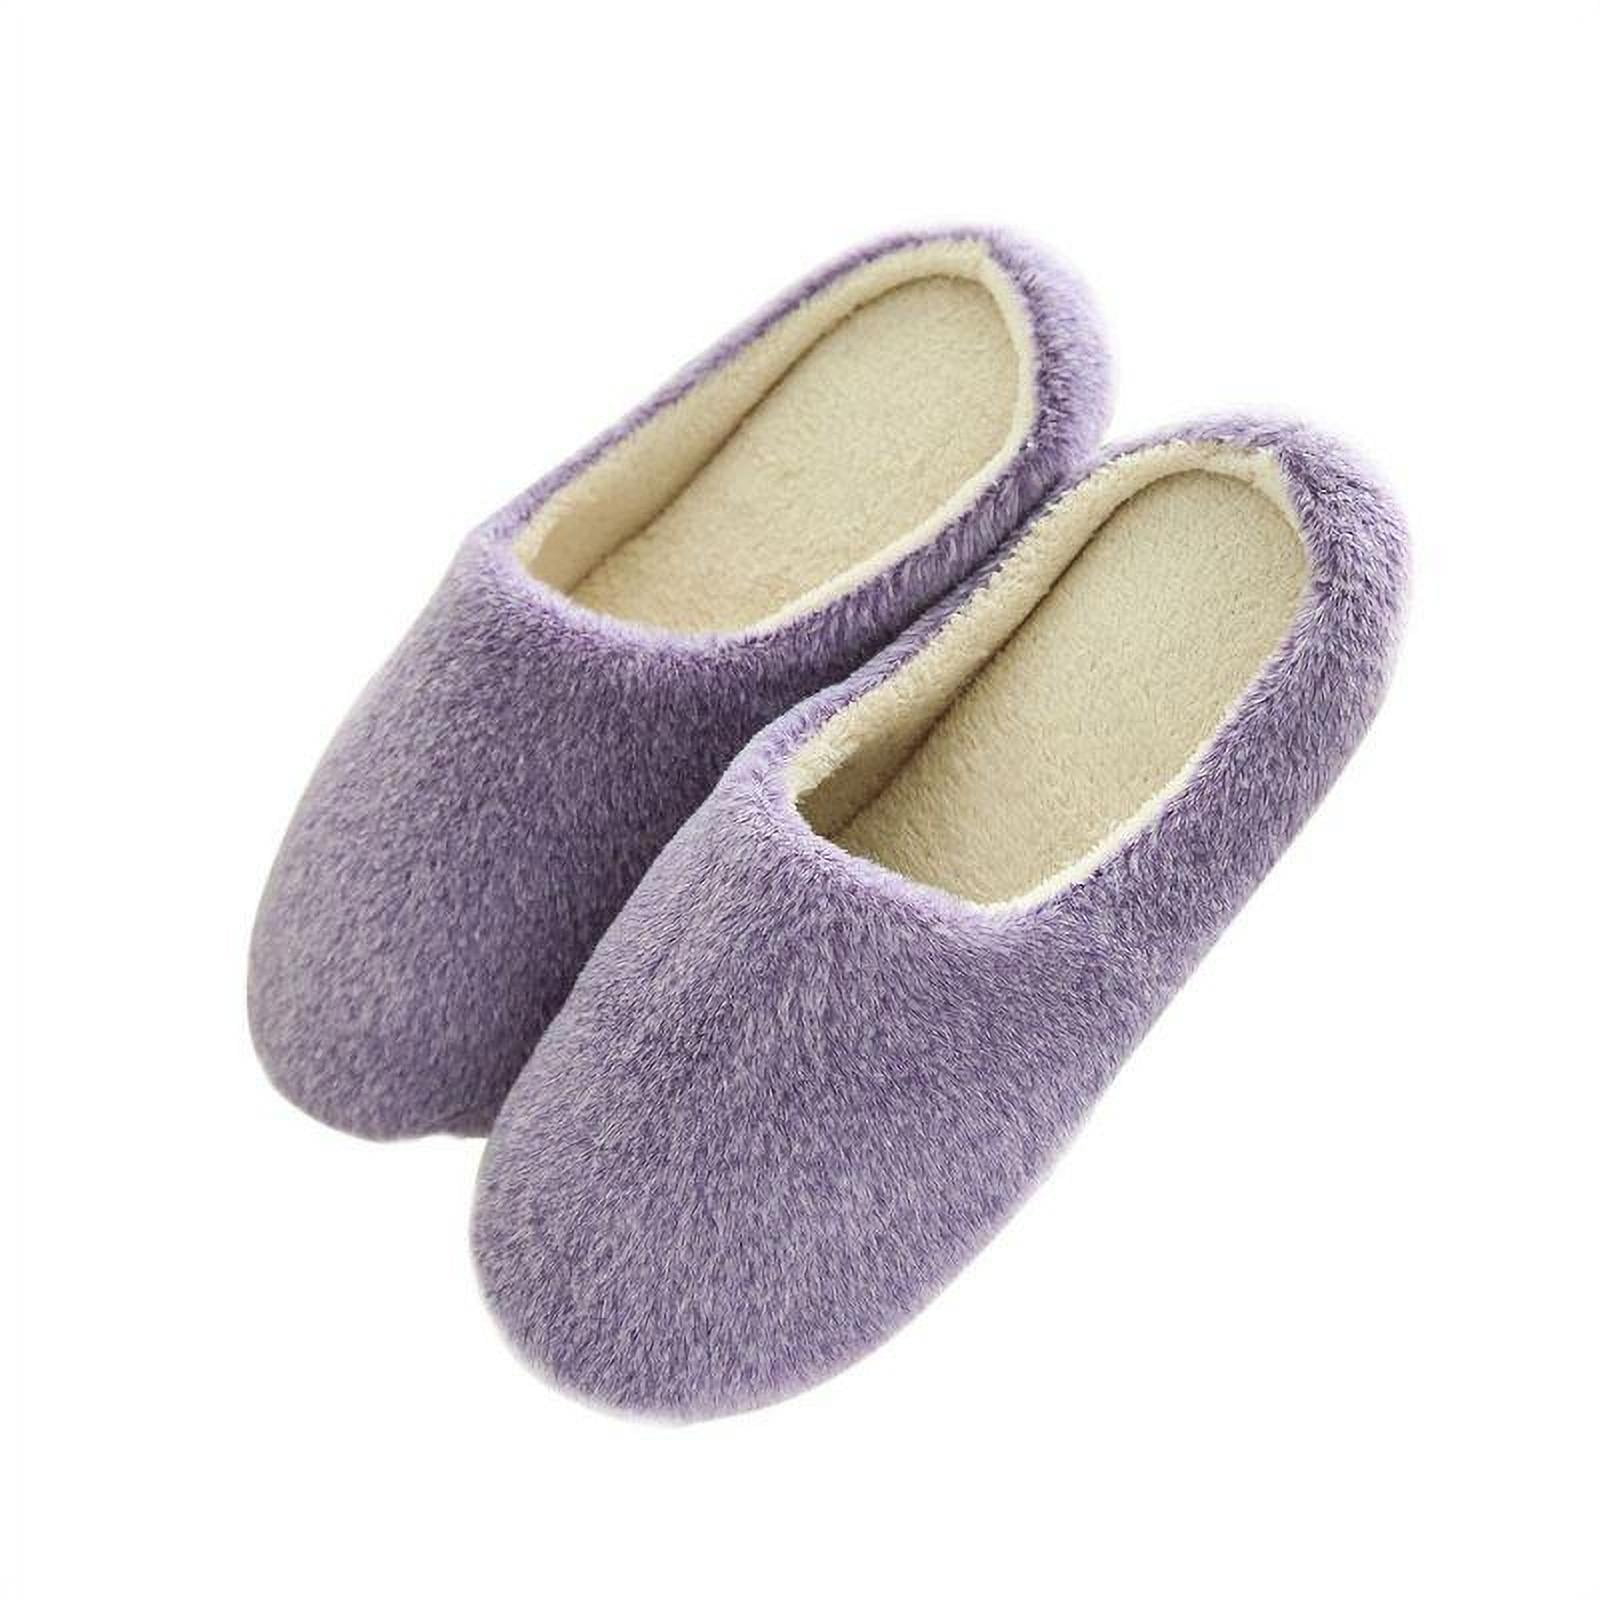 Keimprove Women s Cozy Memory Foam Slippers Fuzzy Wool Like Plush Fleece Lined Warm Slip On House Shoes Indoor Outdoor Anti Skid Rubber Sole 972a11ce 2c63 4a16 9651 d9355bba1eda.adccddf76a3764ab39a8f2c9b05afc07